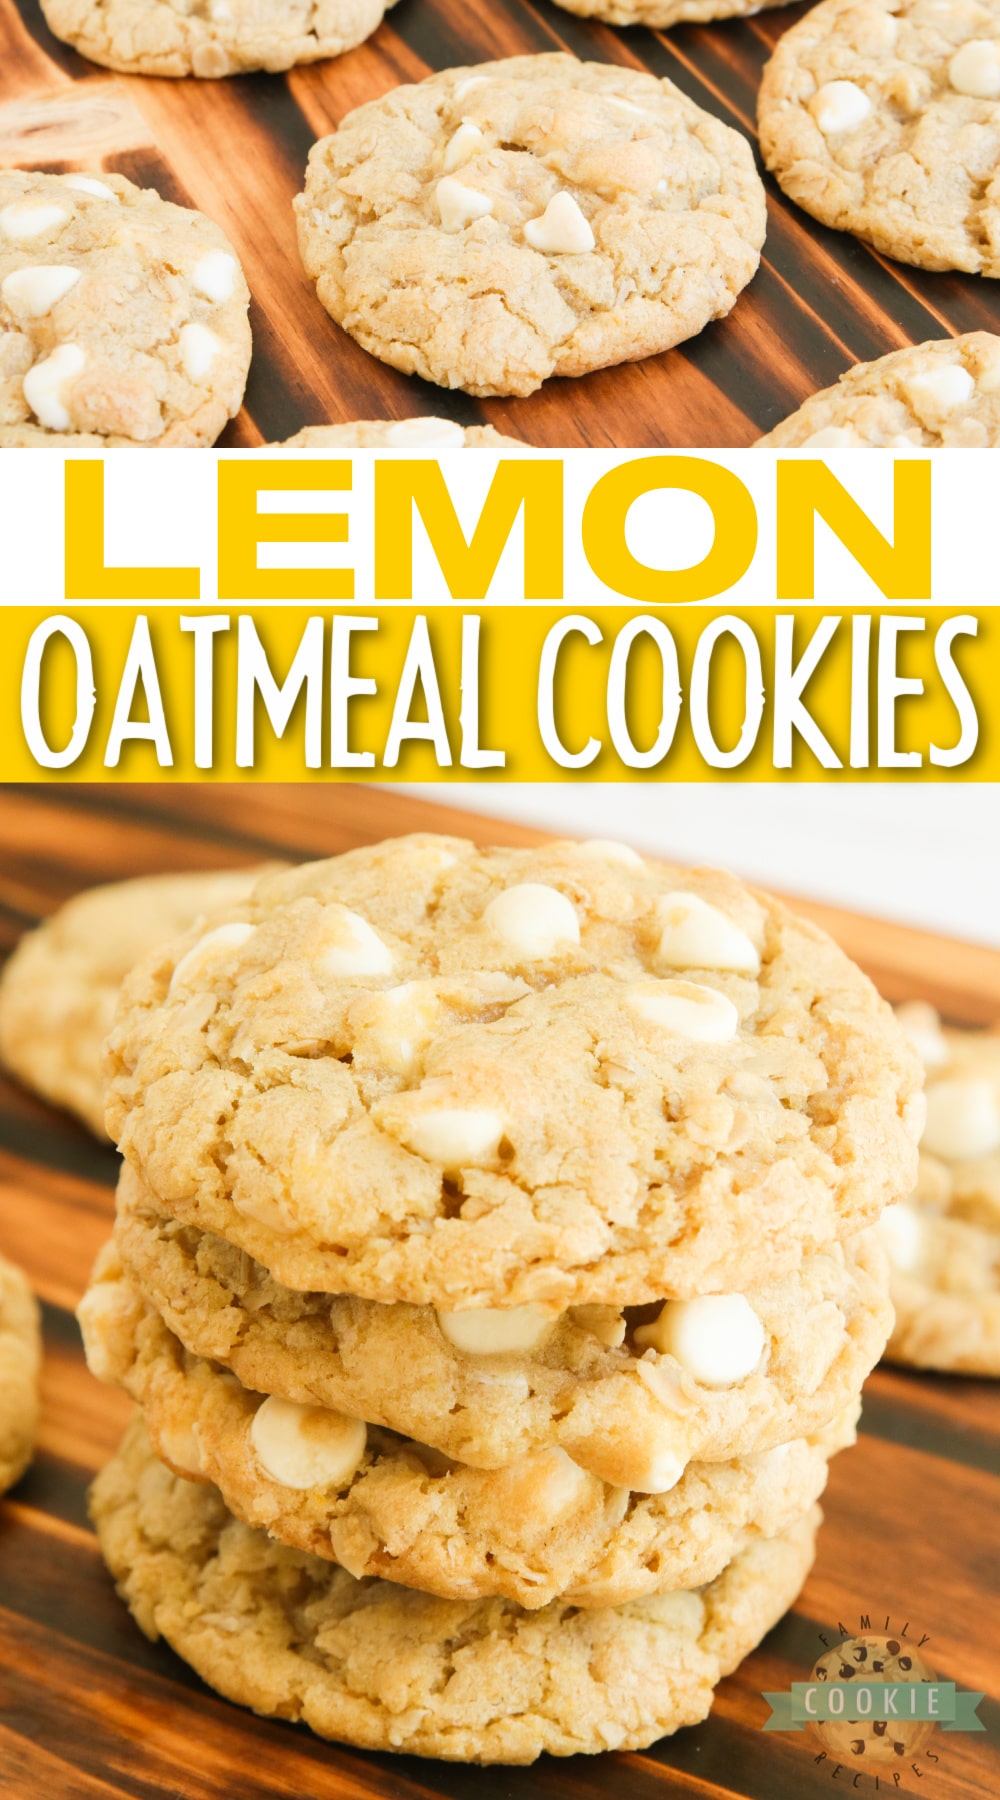 Lemon Oatmeal Cookies are soft, chewy and made with lemon pudding mix and white chocolate chips! Easy oatmeal cookie recipe with a ton of lemon flavor! via @buttergirls